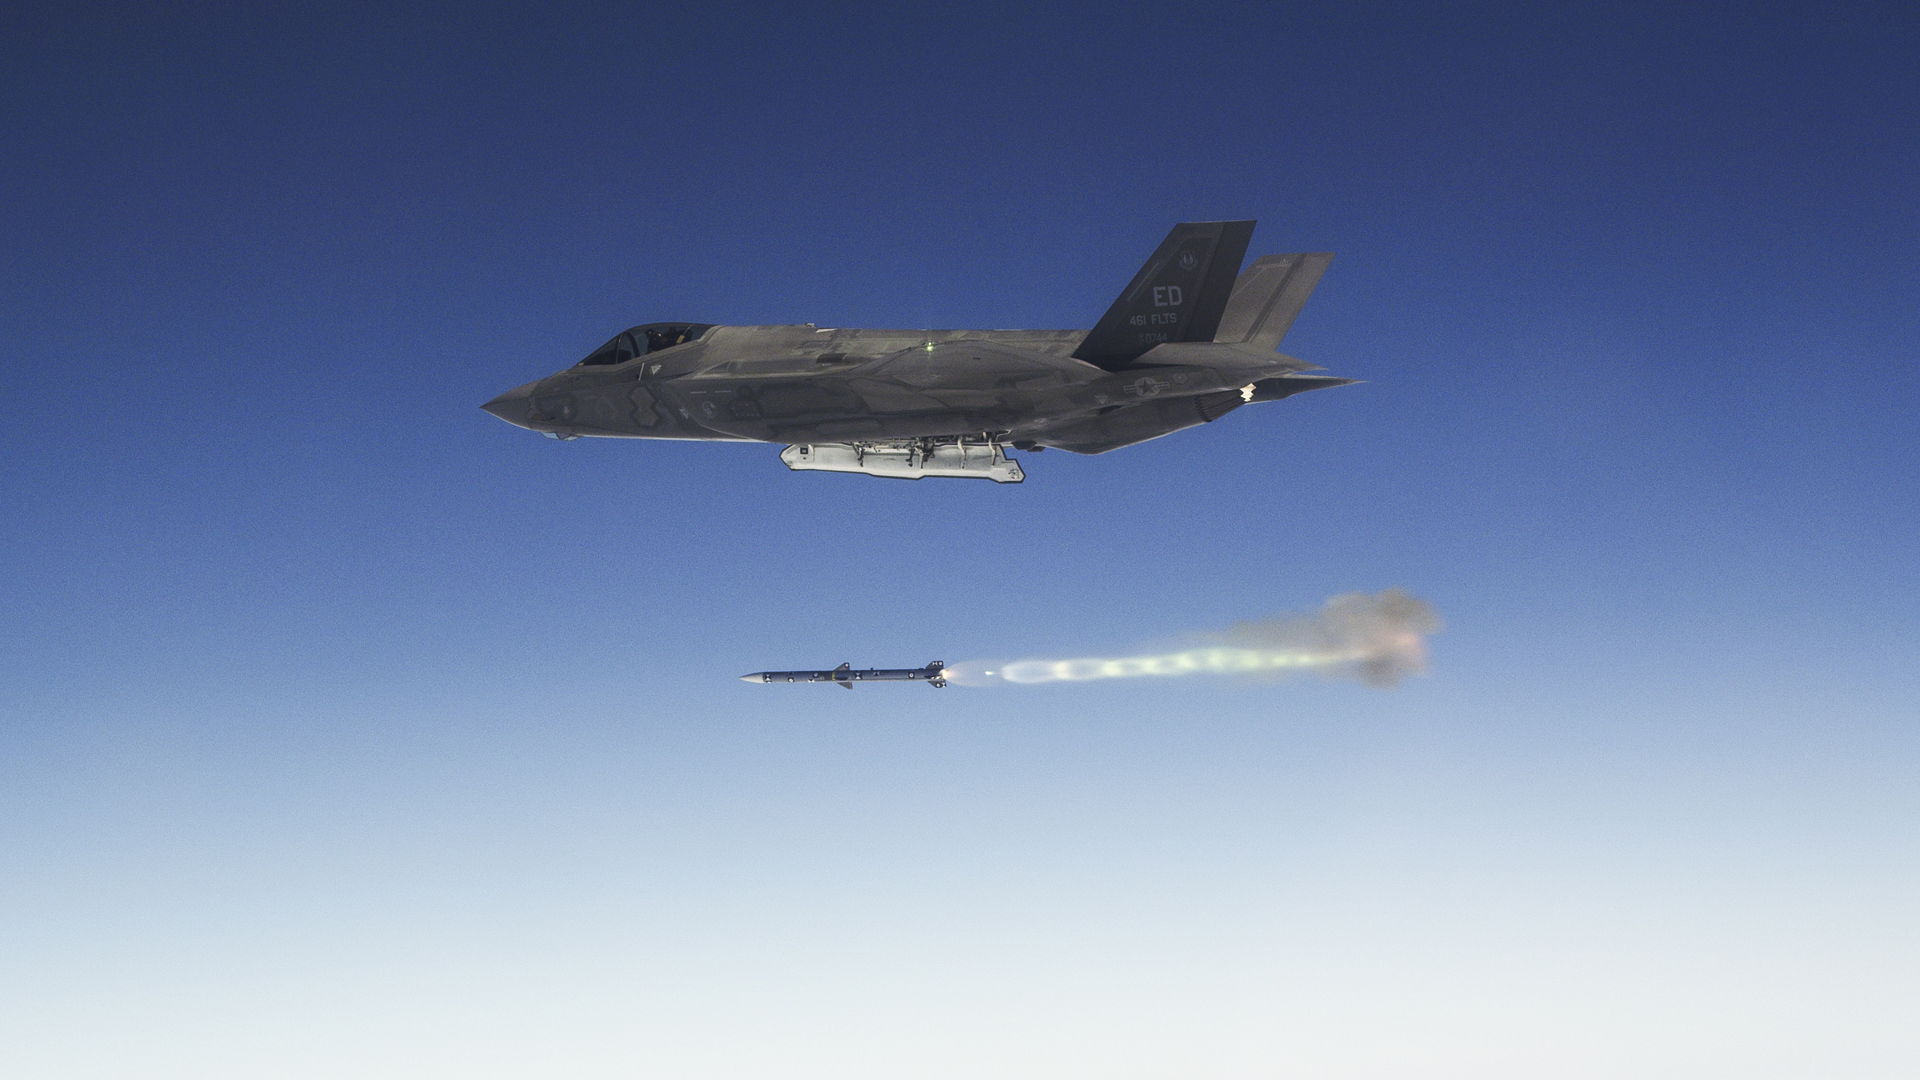 An Edwards AFB F-35A Lightning II fires an AIM-120 Advanced Medium-Range Air-to-Air Missile as part of Weapons Delivery Accuracy testing. The 461st Flight Test Squadron and F-35 Integrated Test Force completed WDA testing in early December, which concludes a large and important part of F-35 developmental test and evaluation. (Courtesy photo by Chad Bellay/Lockheed Martin)